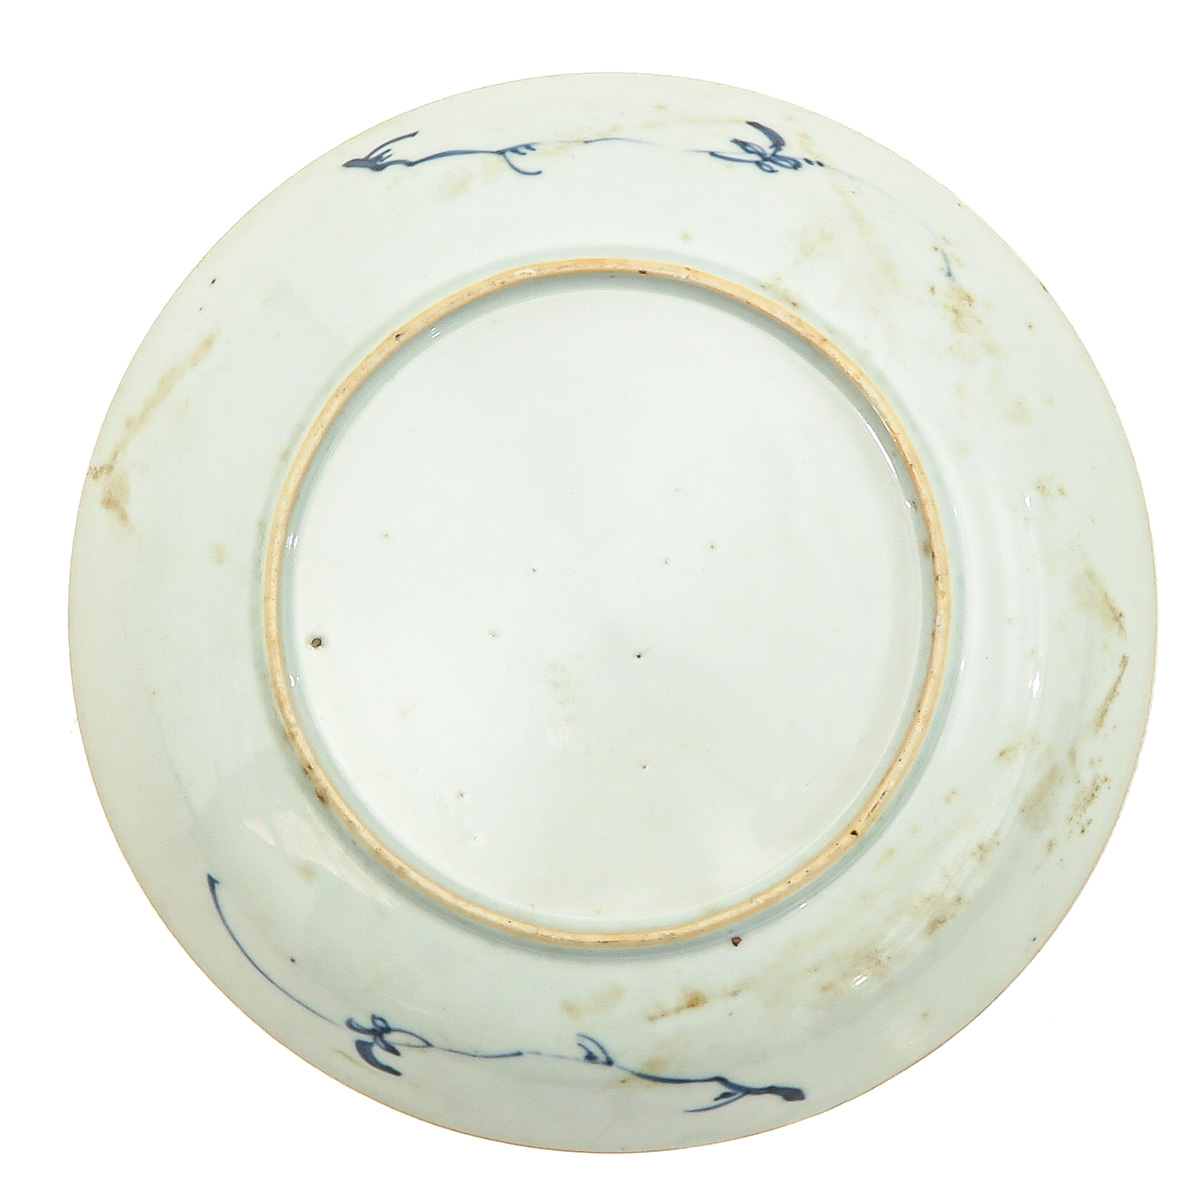 A Collection of 3 Blue and White Plates - Image 4 of 10